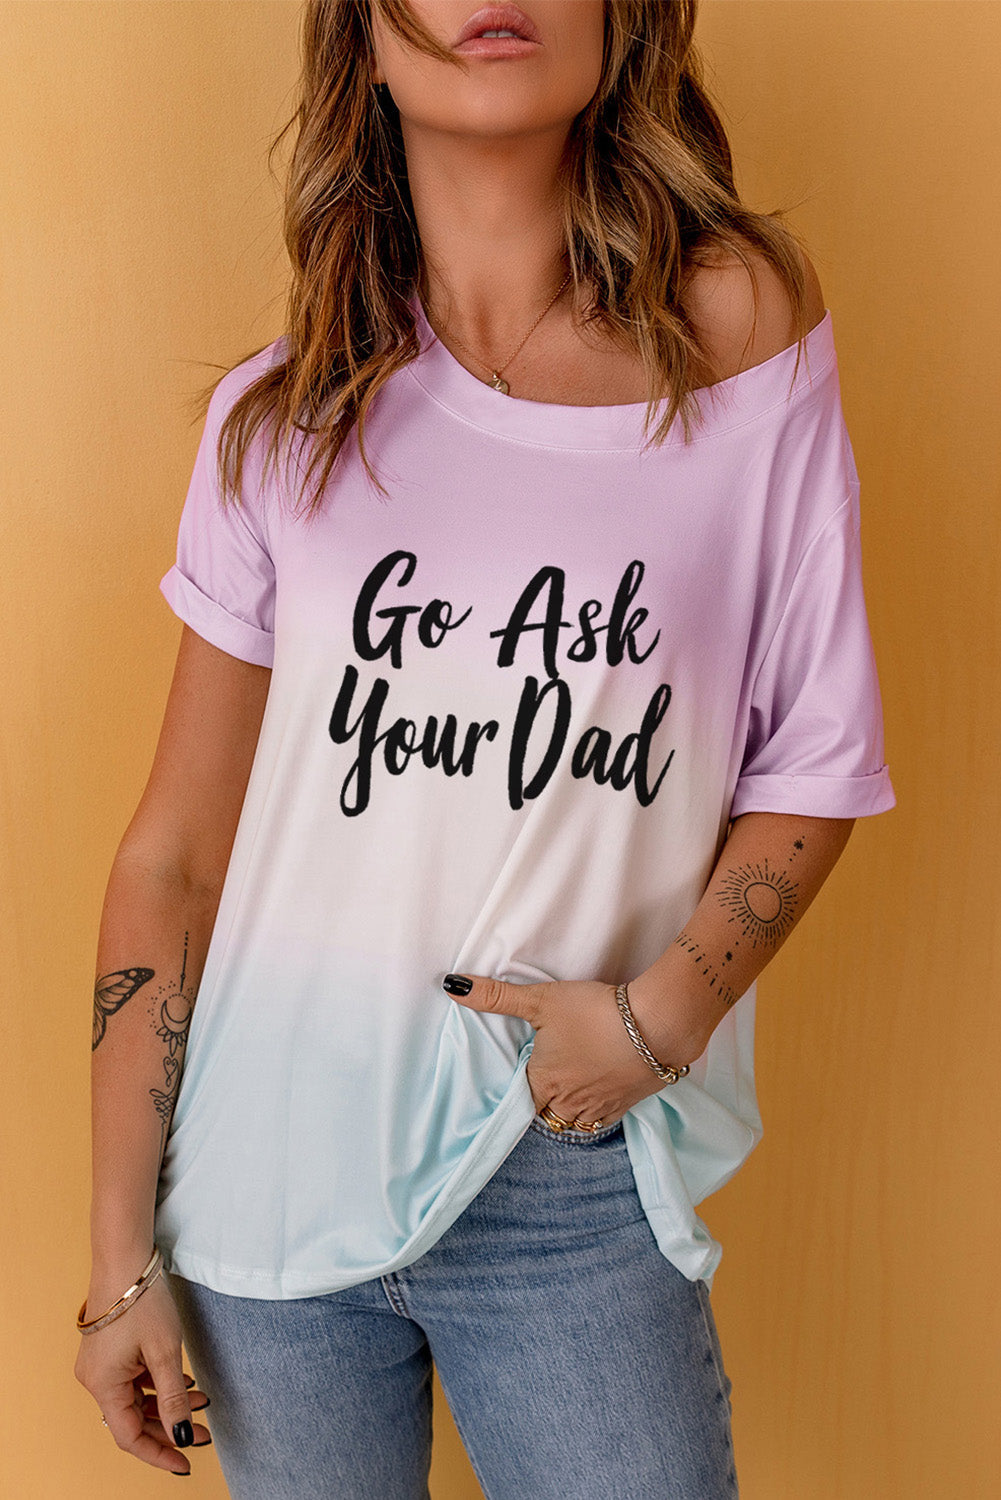 GO ASK YOUR DAD Graphic Tee - Purple / S - T-Shirts - Shirts & Tops - 5 - 2024